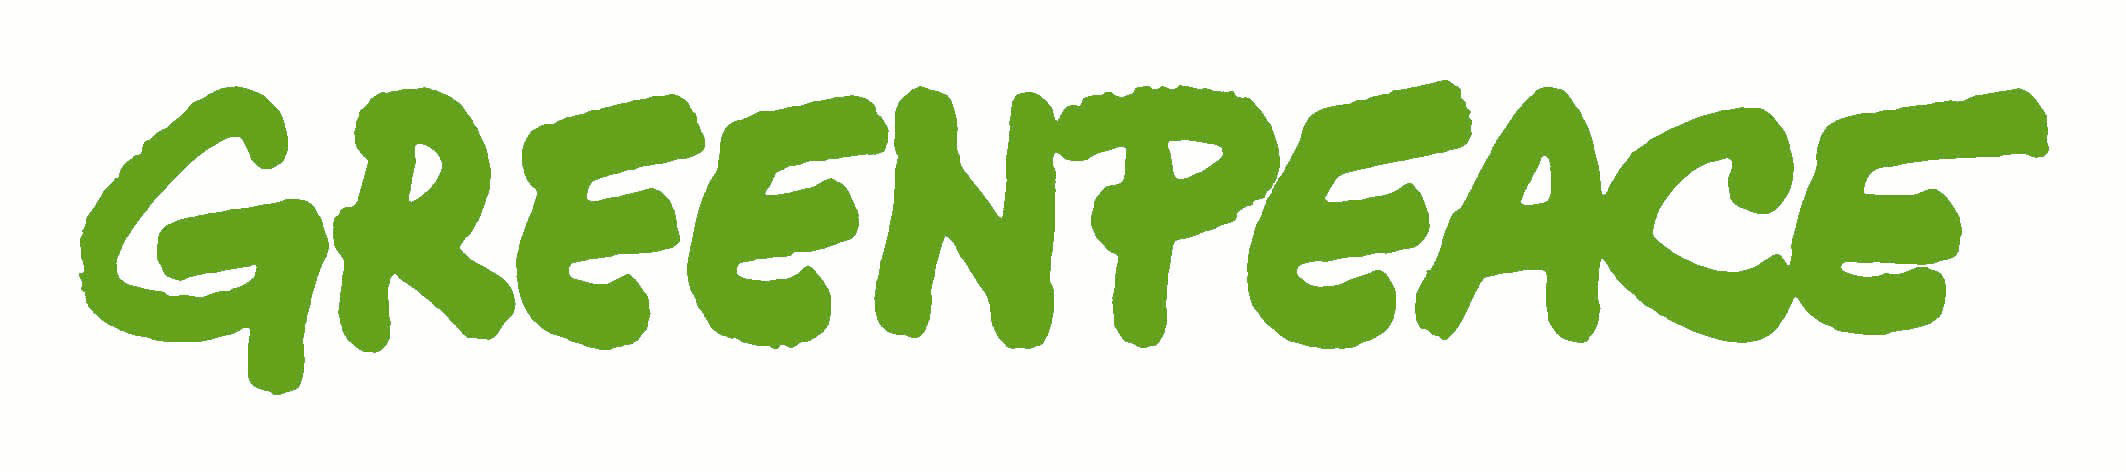 Logo of Piquee's client Greenpeace